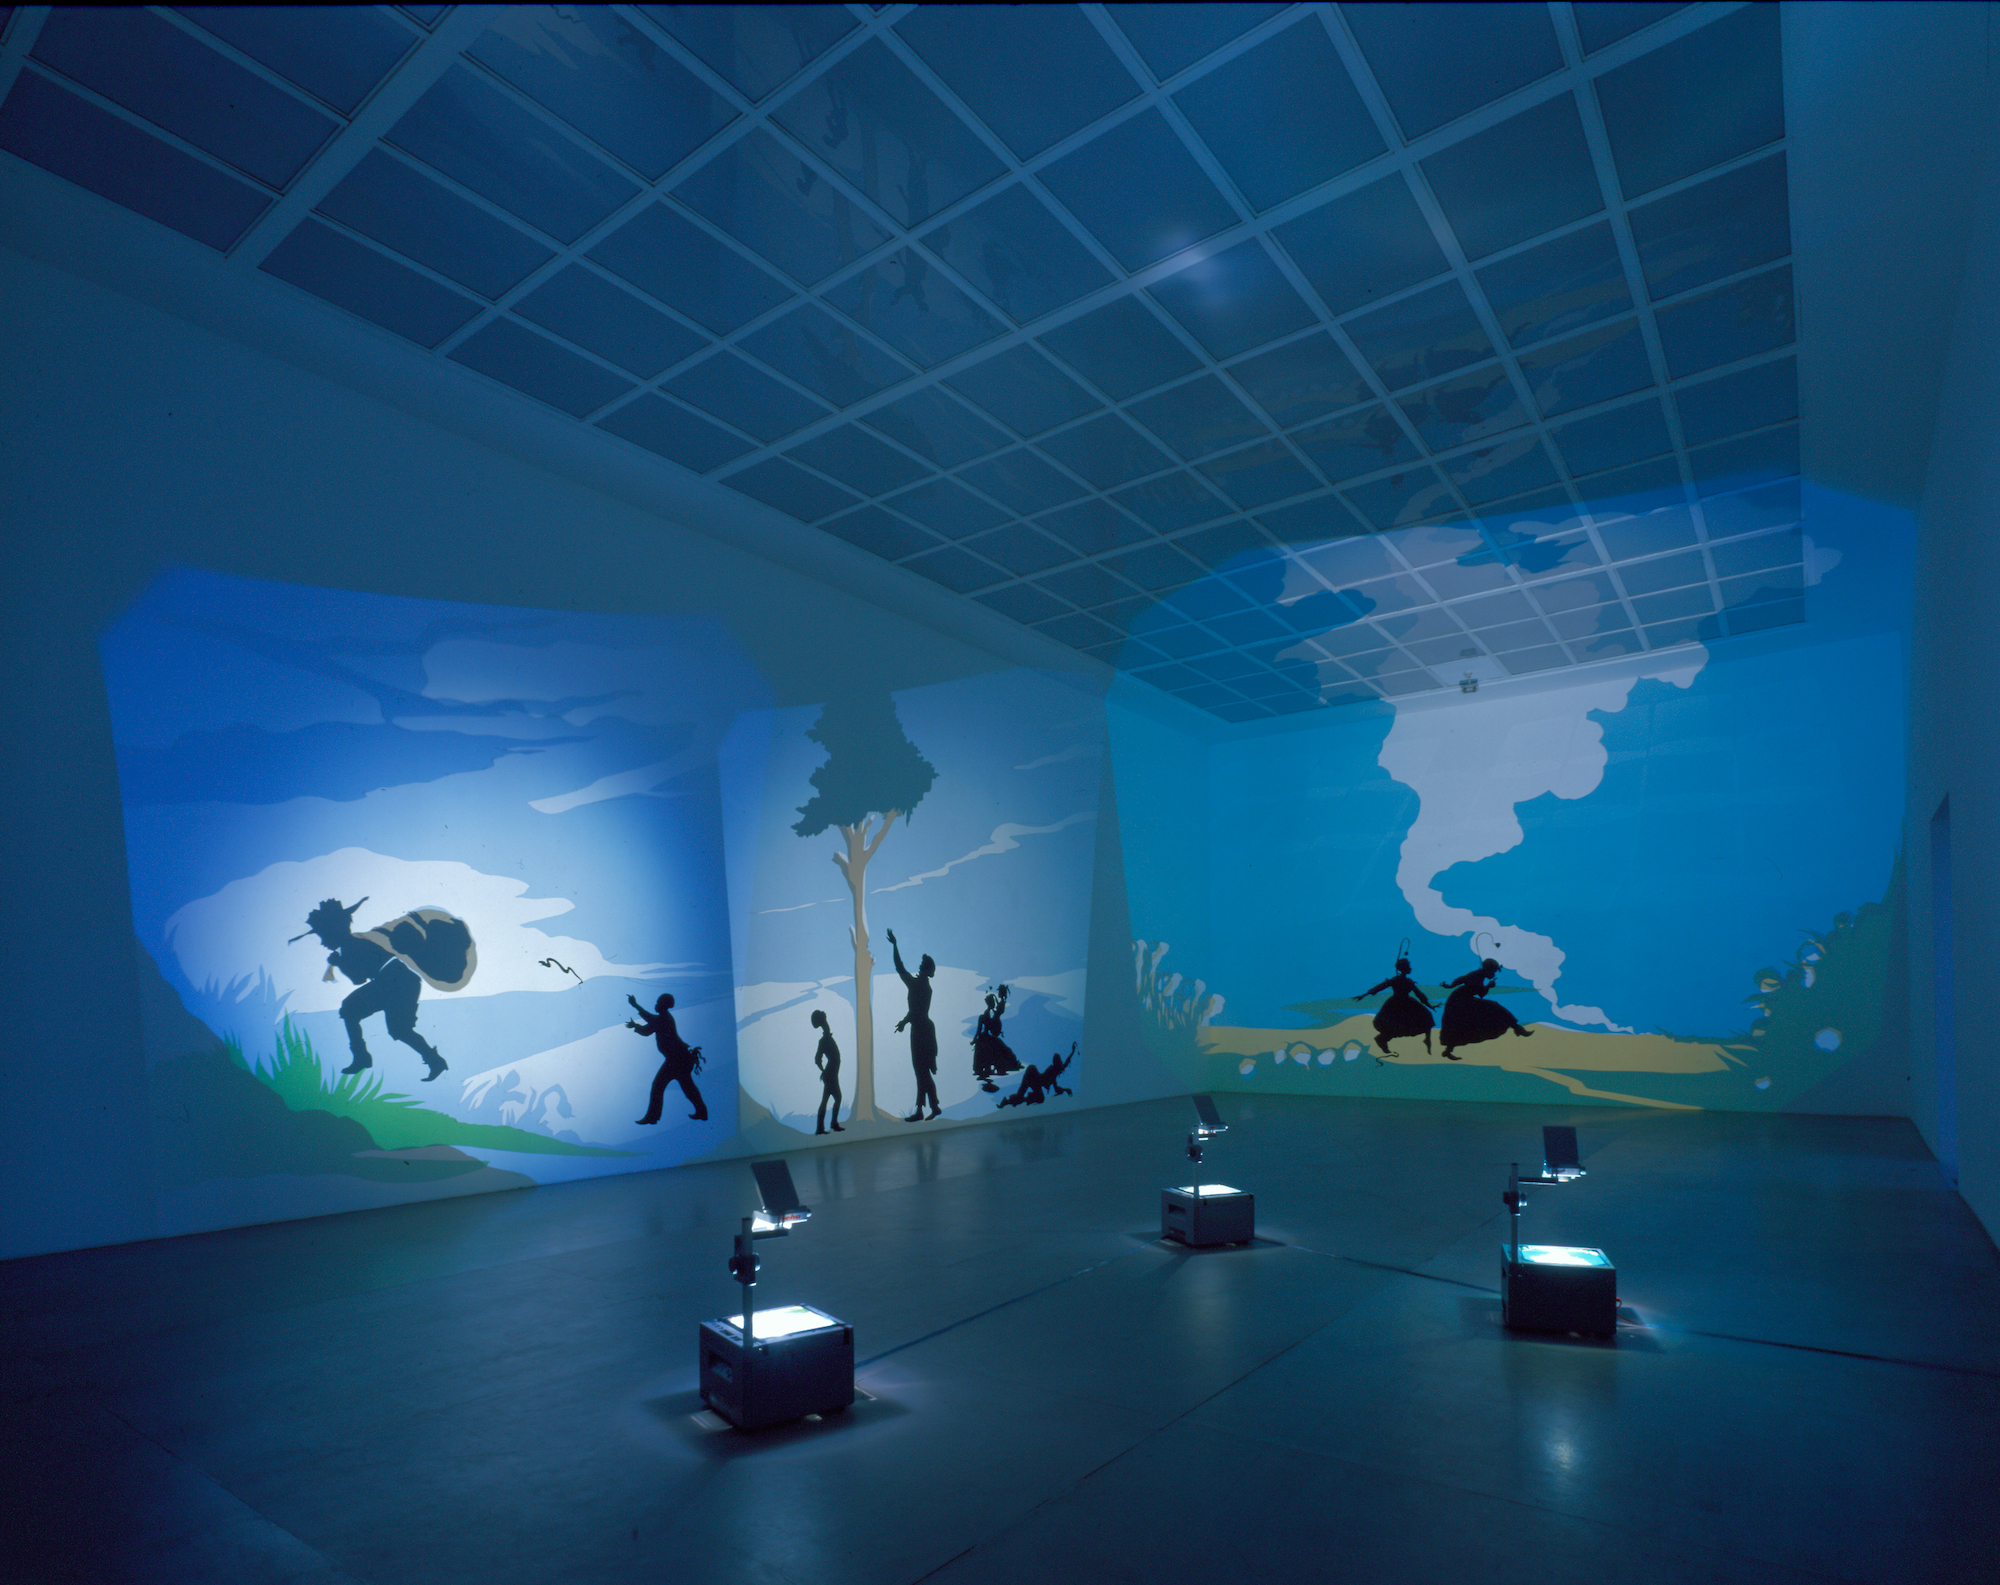  Kara Walker,&nbsp; For the Benefit of all the Races of Mankind (Mos' Specially the Master One, Boss) An Exhibition of Artifacts, Remnants, and Effluvia EXCAVATED from the Black Heart of a Negress I &amp; II , 2002. Cut paper and projection on wall, 